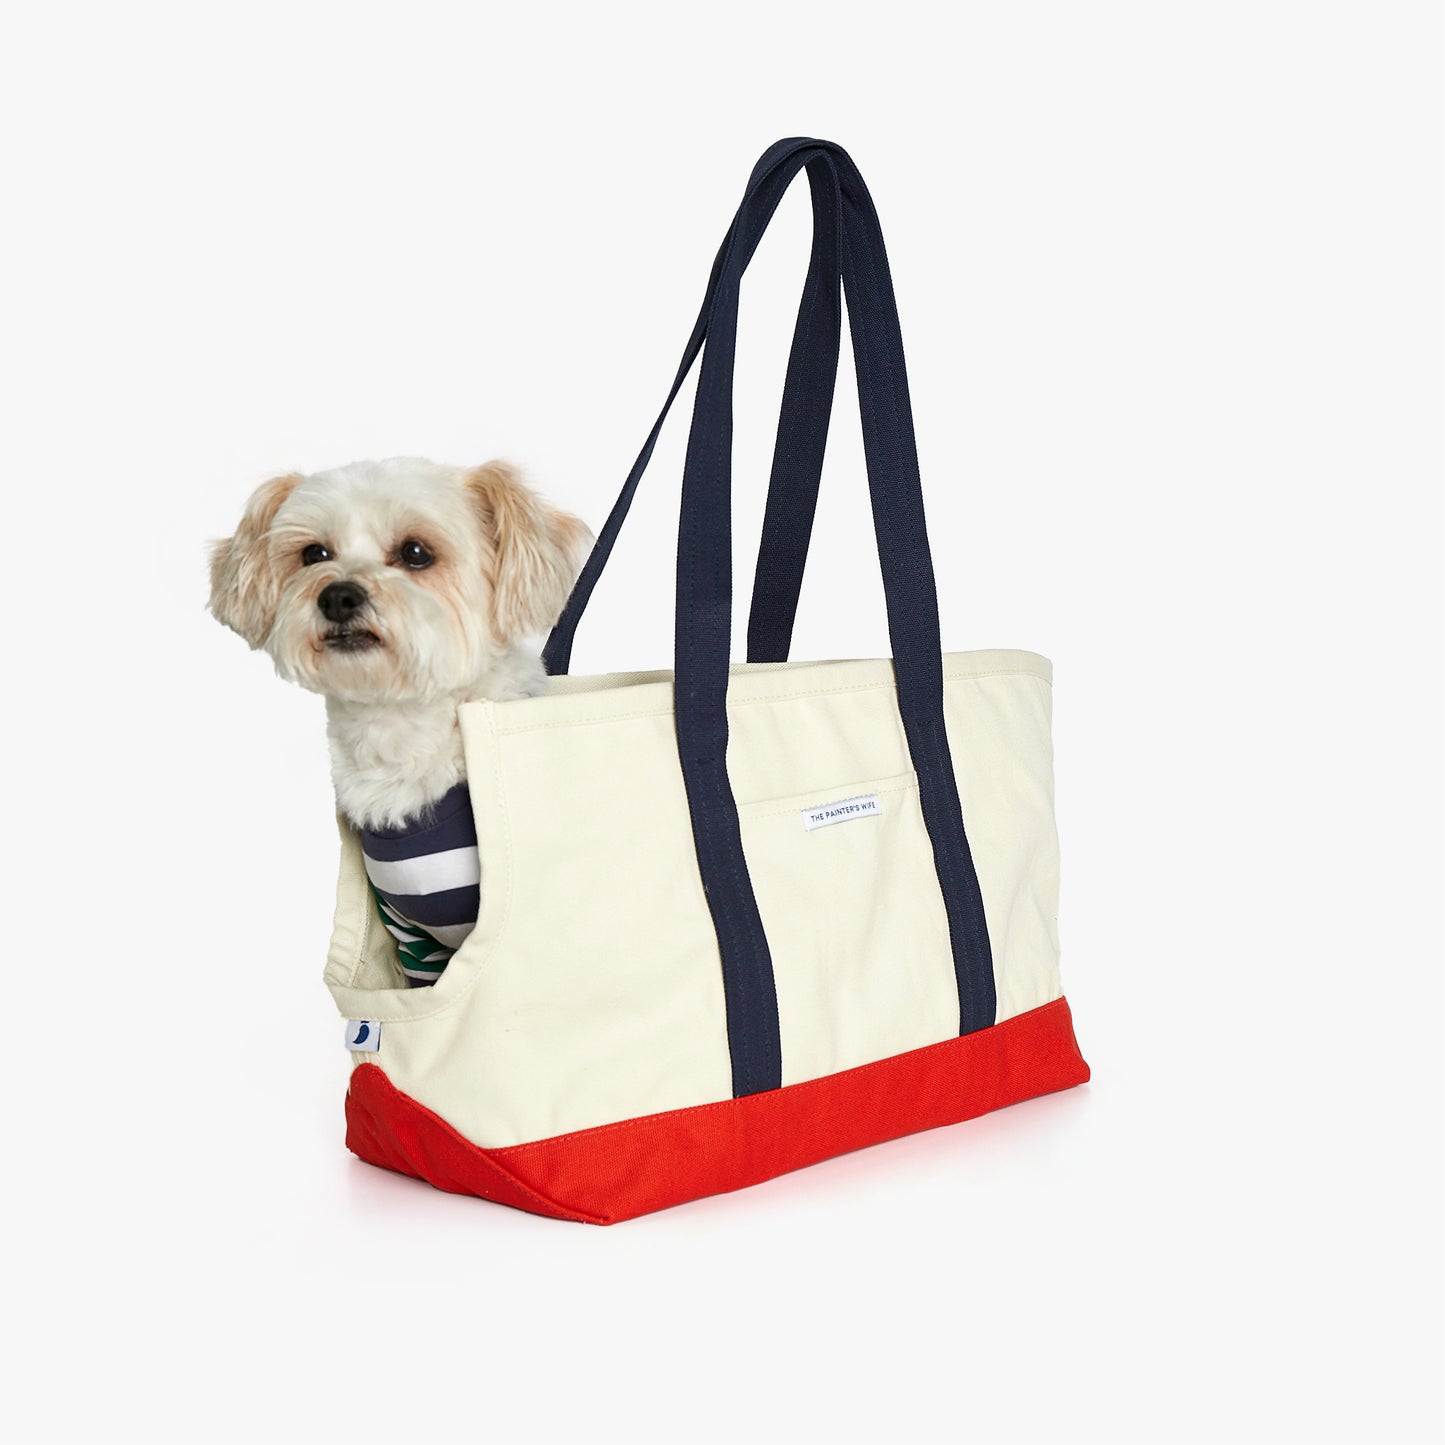 Constantin Carrier Bag with Sherpa Lining - Navy and Red